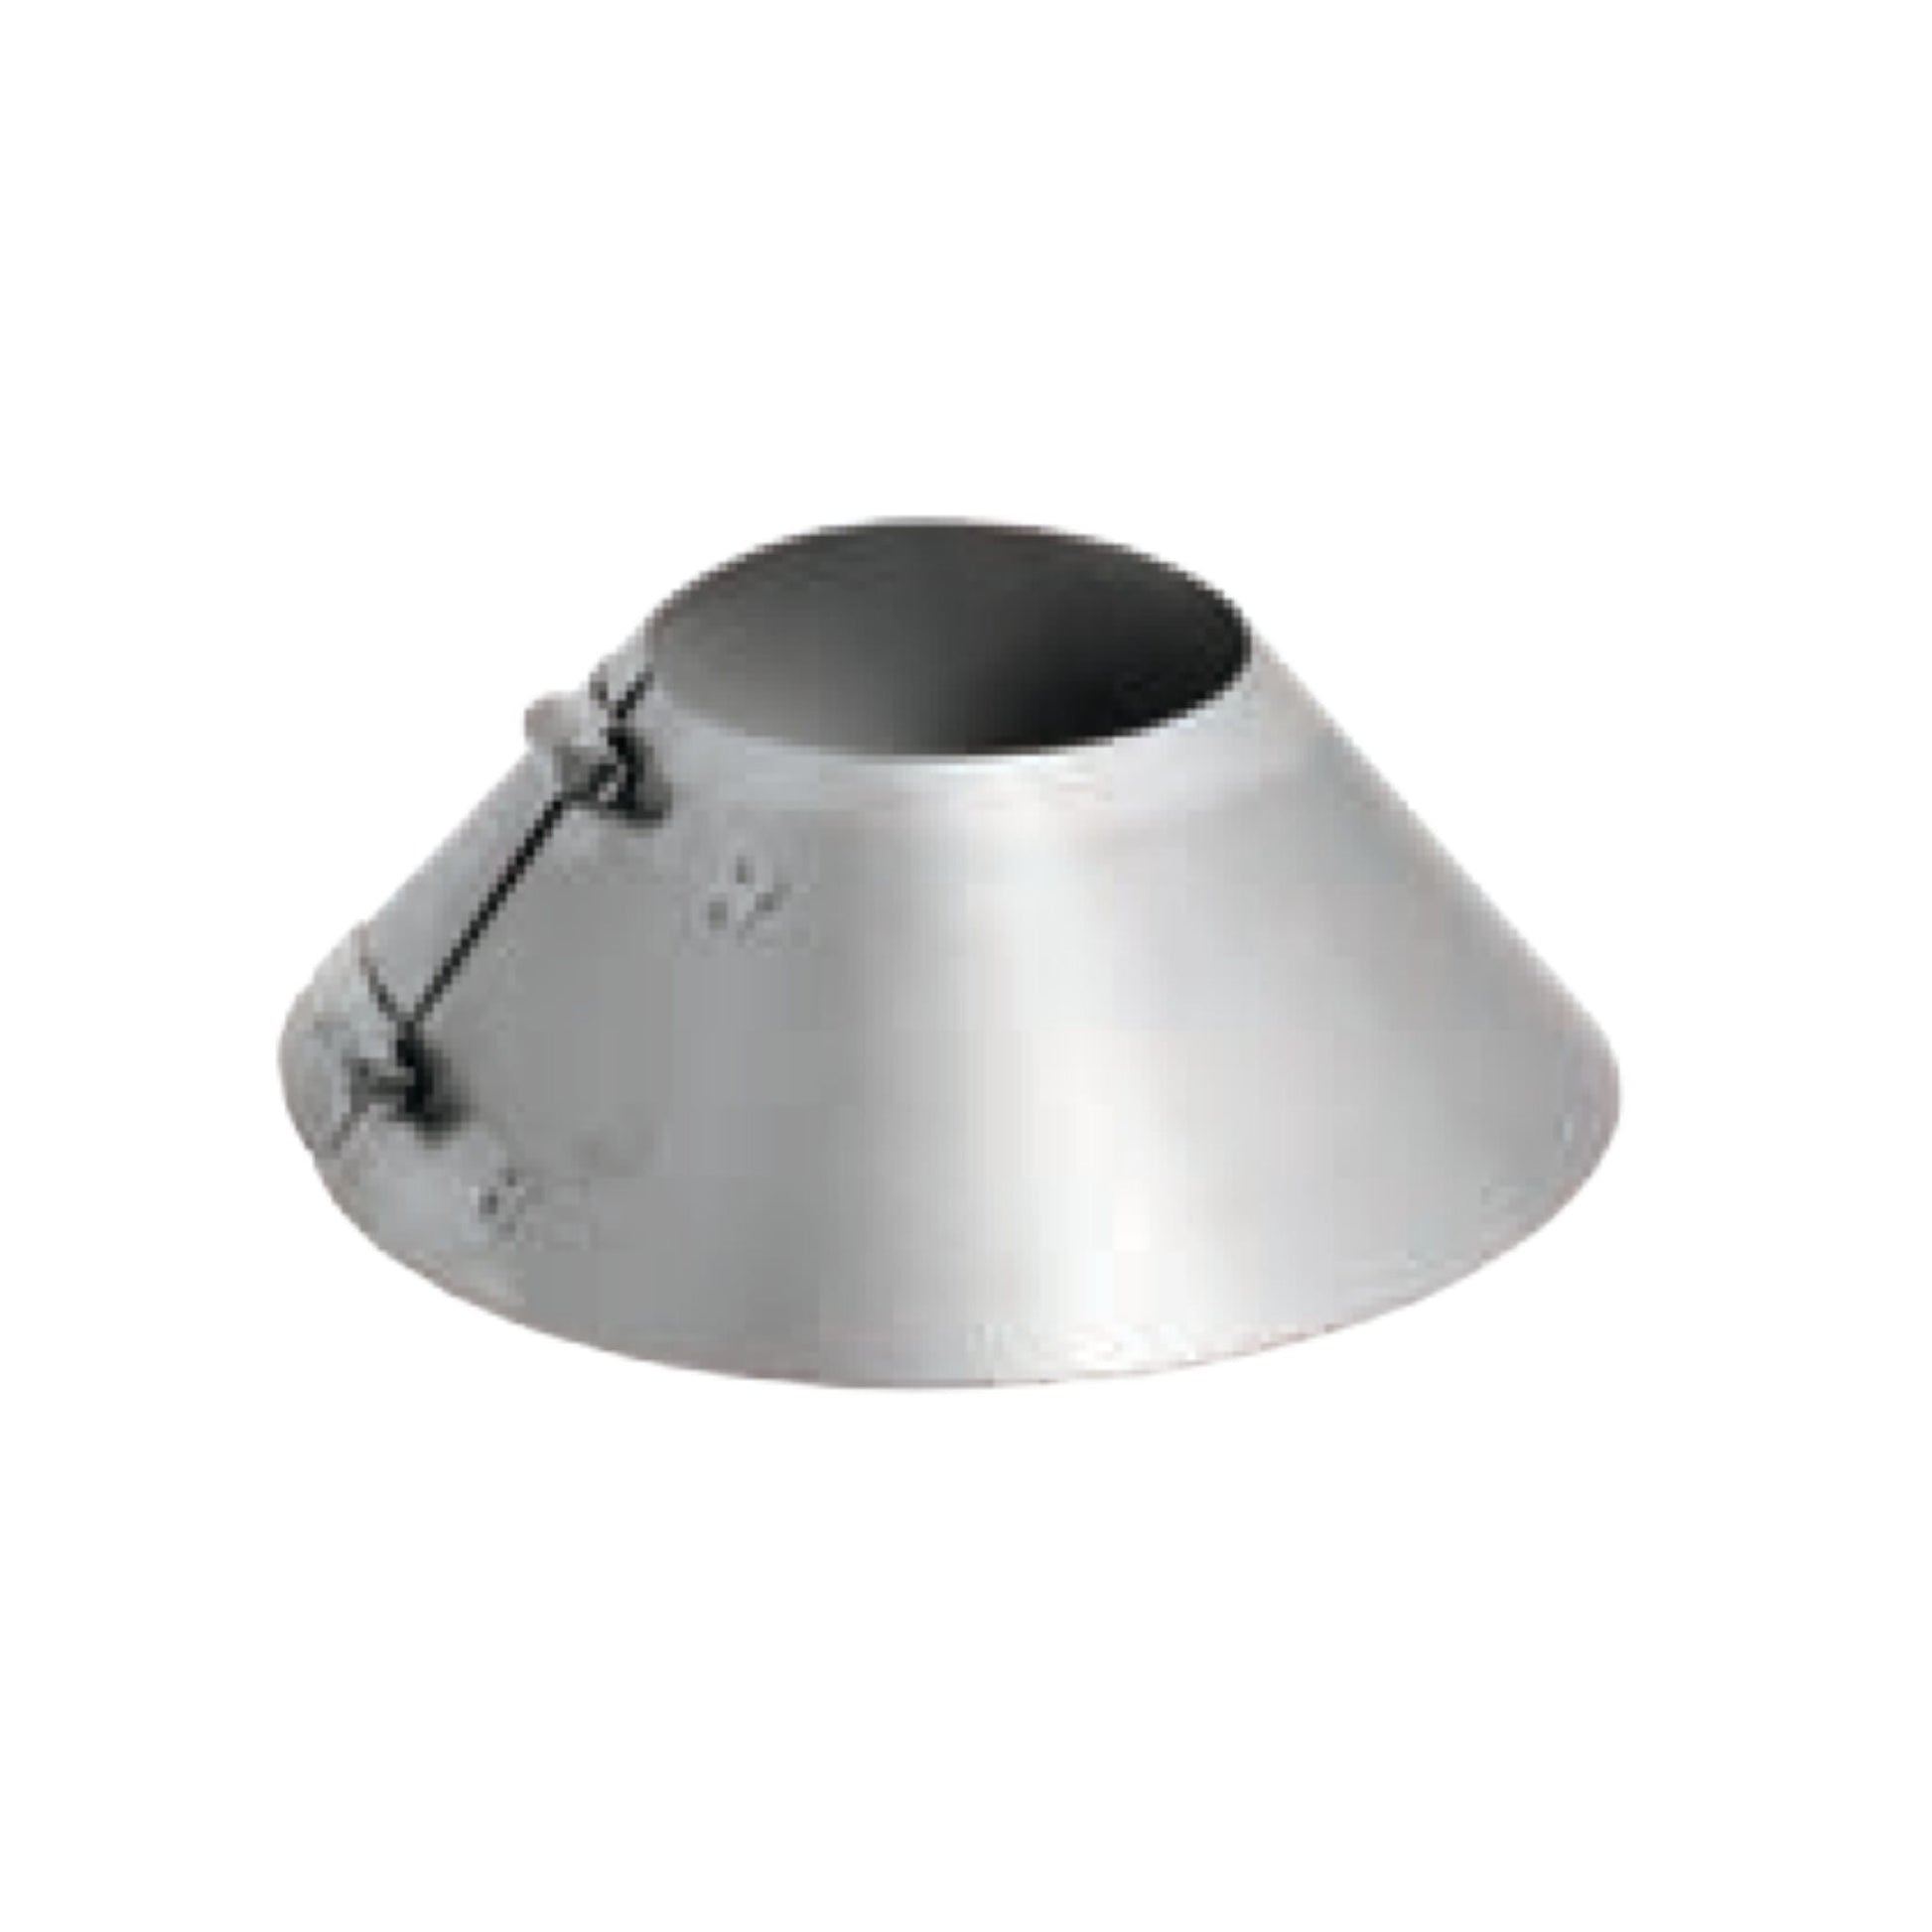 DuraVent FasNSeal 14" 29-4C Stainless Steel Storm Collar